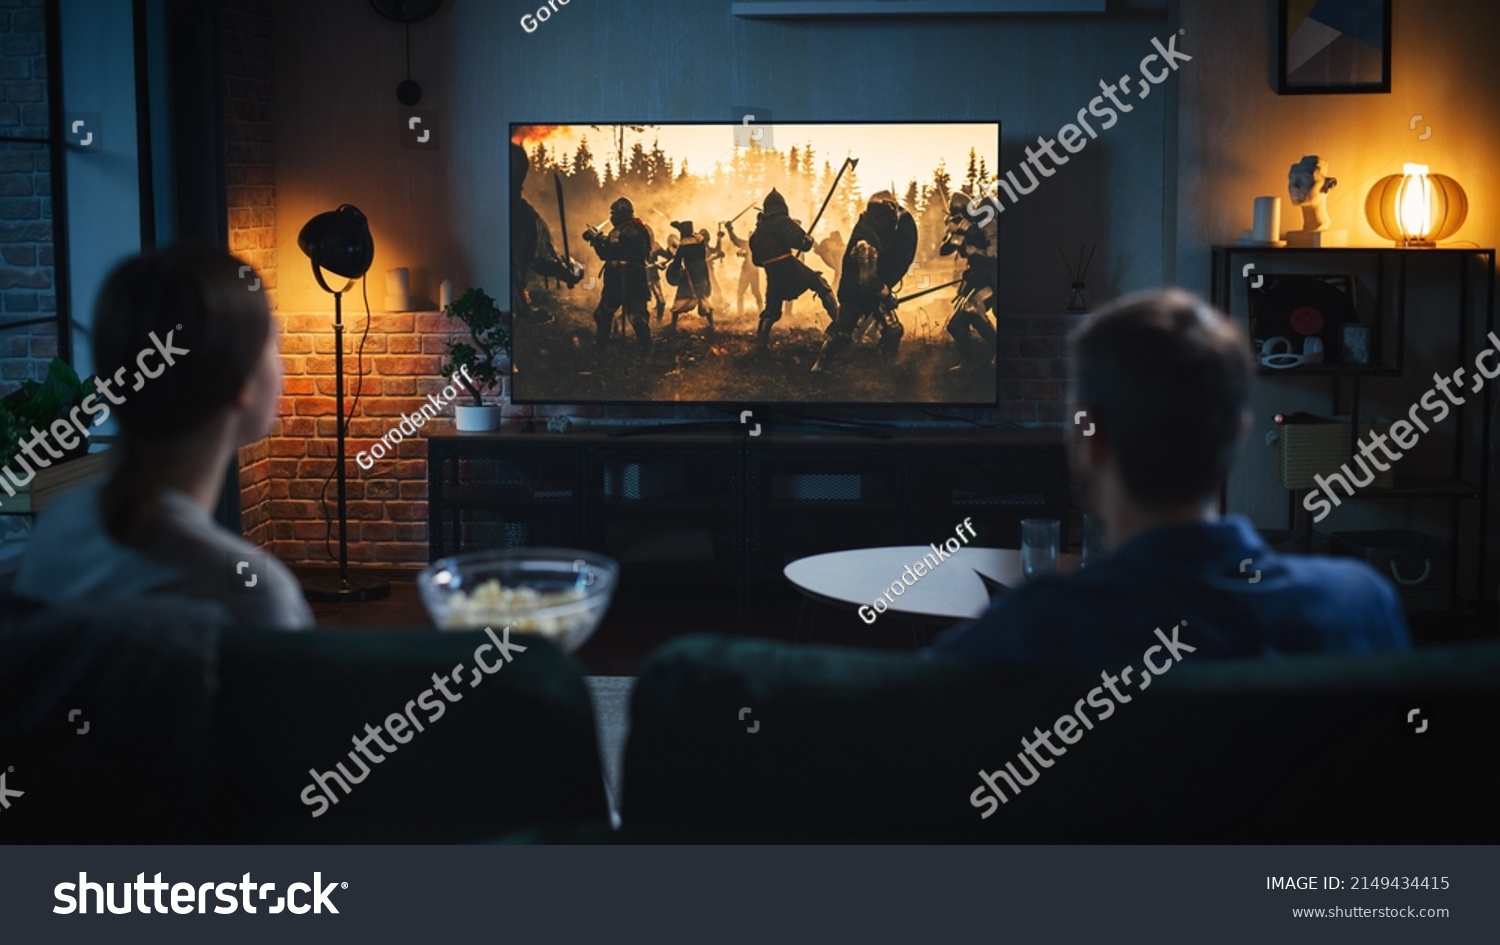 Authentic Couple Spending Time at Home, Sitting on a Couch and Watching Latest Blockbuster on Flat Screen Television Set. Man and Woman Streaming Movie or Show Using Home Cinema System. #2149434415